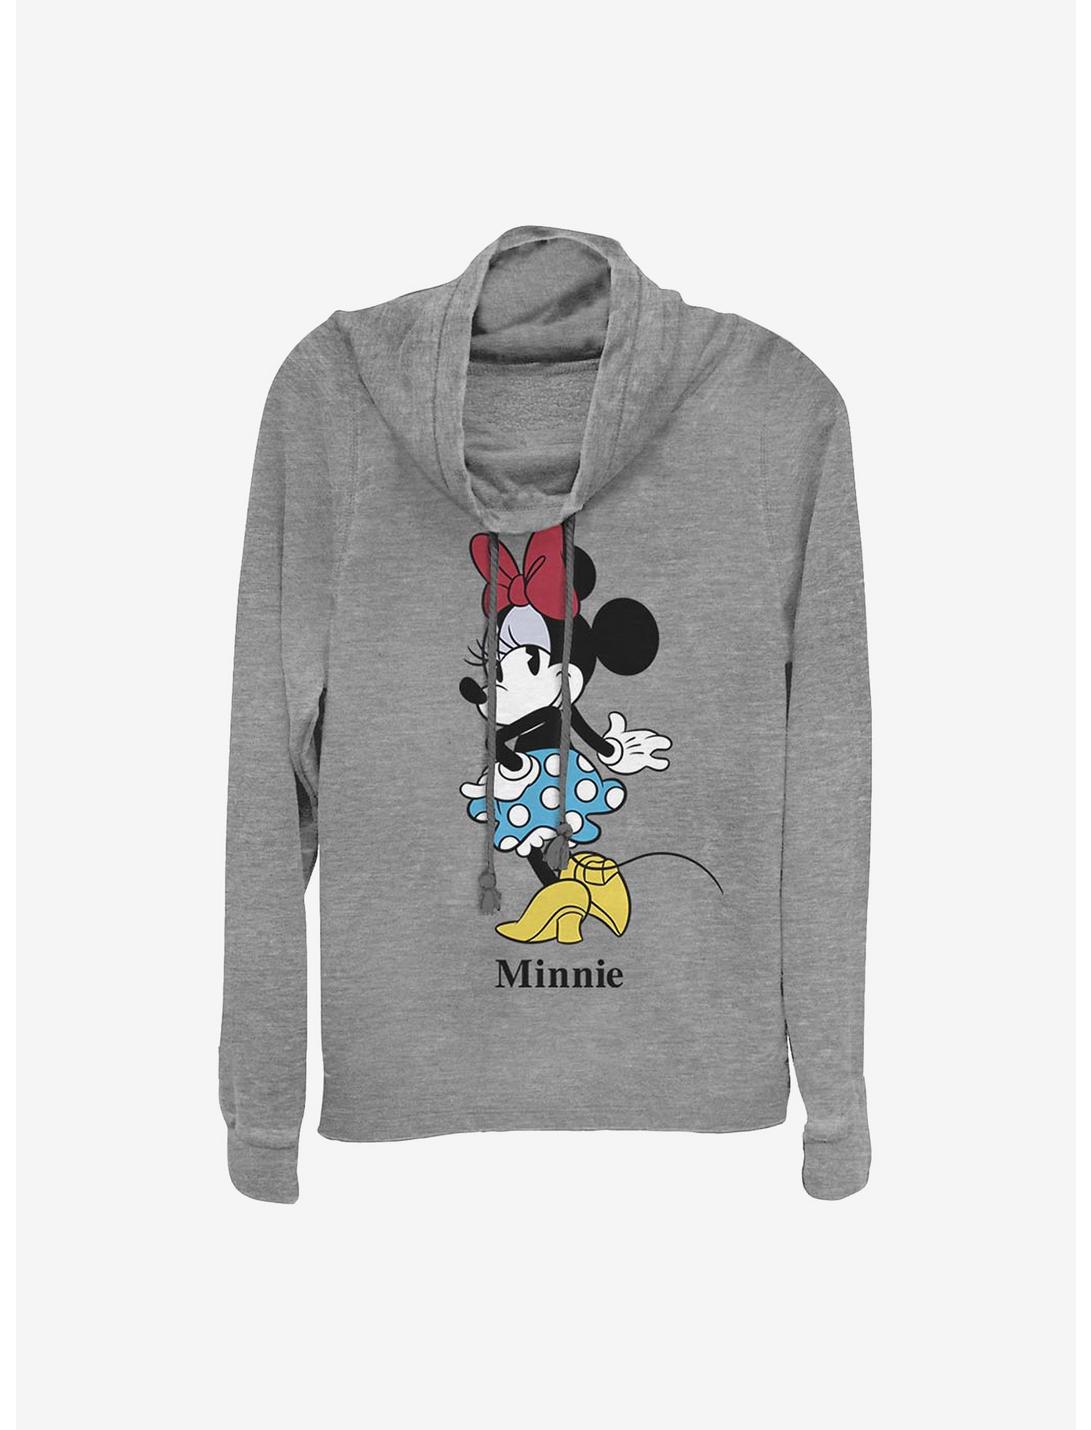 Disney Minnie Mouse Minnie Skirt Cowlneck Long-Sleeve Girls Top, GRAY HTR, hi-res